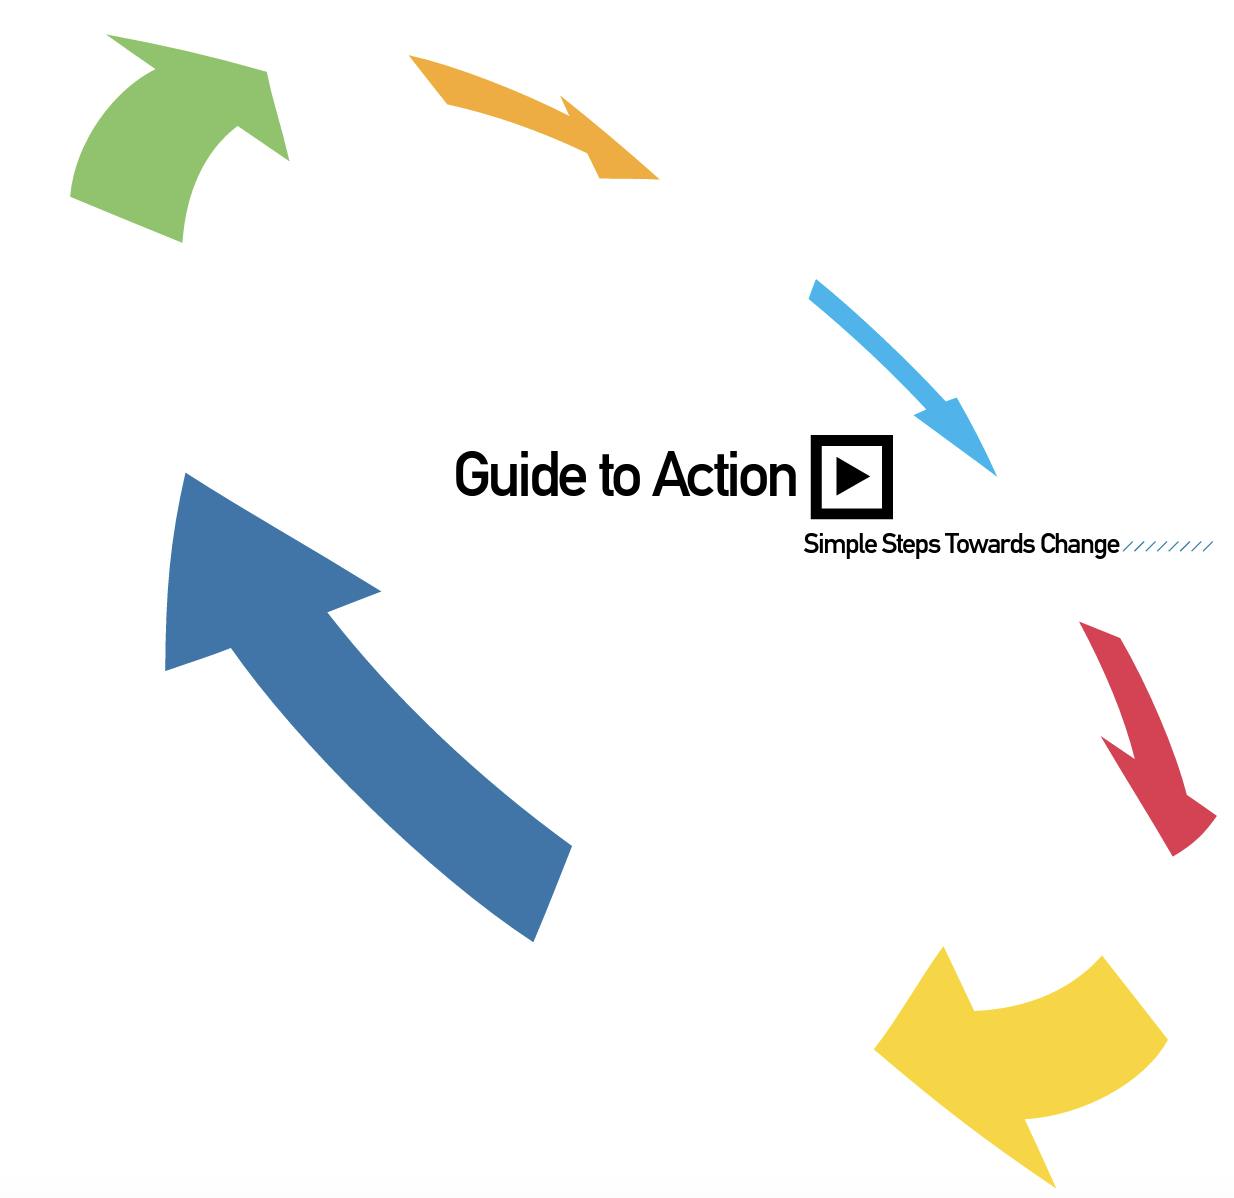 Guide to Action